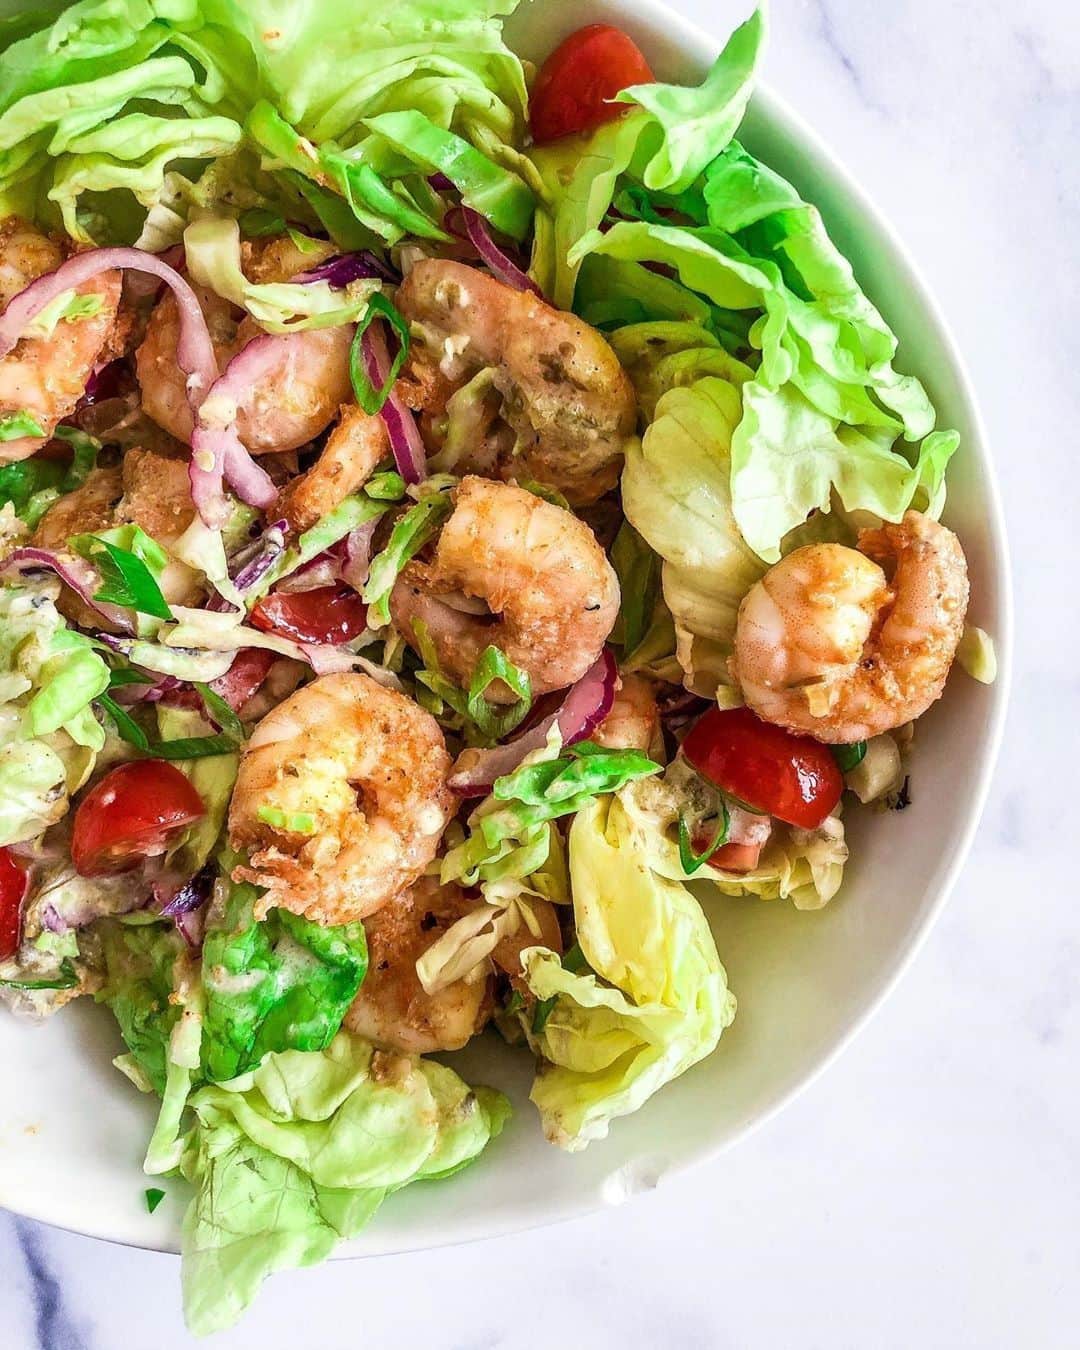 Flavorgod Seasoningsさんのインスタグラム写真 - (Flavorgod SeasoningsInstagram)「Spicy Shrimp Salad 🥗 ⁣⁠ ⁣-⁠ Customer:👉 @paleosnaps⁠ Seasoned with:👉 #Flavorgod Cajun Lovers Seasonings⁠ -⁠ KETO friendly flavors available here ⬇️⁠ Click link in the bio -> @flavorgod⁠ www.flavorgod.com⁠ -⁠ 𝘊𝘰𝘭𝘦𝘴𝘭𝘢𝘸 𝘮𝘪𝘹: green caggabe, red cabbage, thinly sliced red onion, 1/2 tspn sea salt & juice of half a lime. Mix and refrigerate for 30 mins. ⁣⁠ ⁣⁠ 𝘚𝘩𝘳𝘪𝘮𝘱: 1 lb shrimp, @flavorgod Cajun seasoning, 2 tspn olive oil (split), sea salt and fresh cracked pepper. ⁣⁠ • mix 1 tspn olive oil, shrimp and seasonings in a bowl • heat 1 tspn olive oil over medium and cook shrimp 3-4 mins on each side depending on size ⁣⁠ ⁣⁠ 𝘚𝘢𝘭𝘴𝘢 𝘋𝘳𝘦𝘴𝘴𝘪𝘯𝘨: mix 1/4 cup tomatillo salsa, 1 tbsp paleo mayo and @sietefoods jalapeño hot sauce. ⁣⁠ ⁣⁠ 𝘚𝘢𝘭𝘢𝘥: butter lettuce topped with cherry tomatoes, green onions, coleslaw mix, shrimp and salsa dressing. ⁣⁠ -⁠ Flavor God Seasonings are:⁠ 💥 Zero Calories per Serving ⁠ 🙌 0 Sugar per Serving⁠ 🔥 #KETO & #PALEO Friendly⁠ 🌱 GLUTEN FREE & #KOSHER⁠ ☀️ VEGAN-FRIENDLY ⁠ 🌊 Low salt⁠ ⚡️ NO MSG⁠ 🚫 NO SOY⁠ 🥛 DAIRY FREE *except Ranch ⁠ 🌿 All Natural & Made Fresh⁠ ⏰ Shelf life is 24 months⁠ -⁠ #food #foodie #flavorgod #seasonings #glutenfree #mealprep #seasonings #breakfast #lunch #dinner #yummy #delicious #foodporn」7月19日 8時00分 - flavorgod